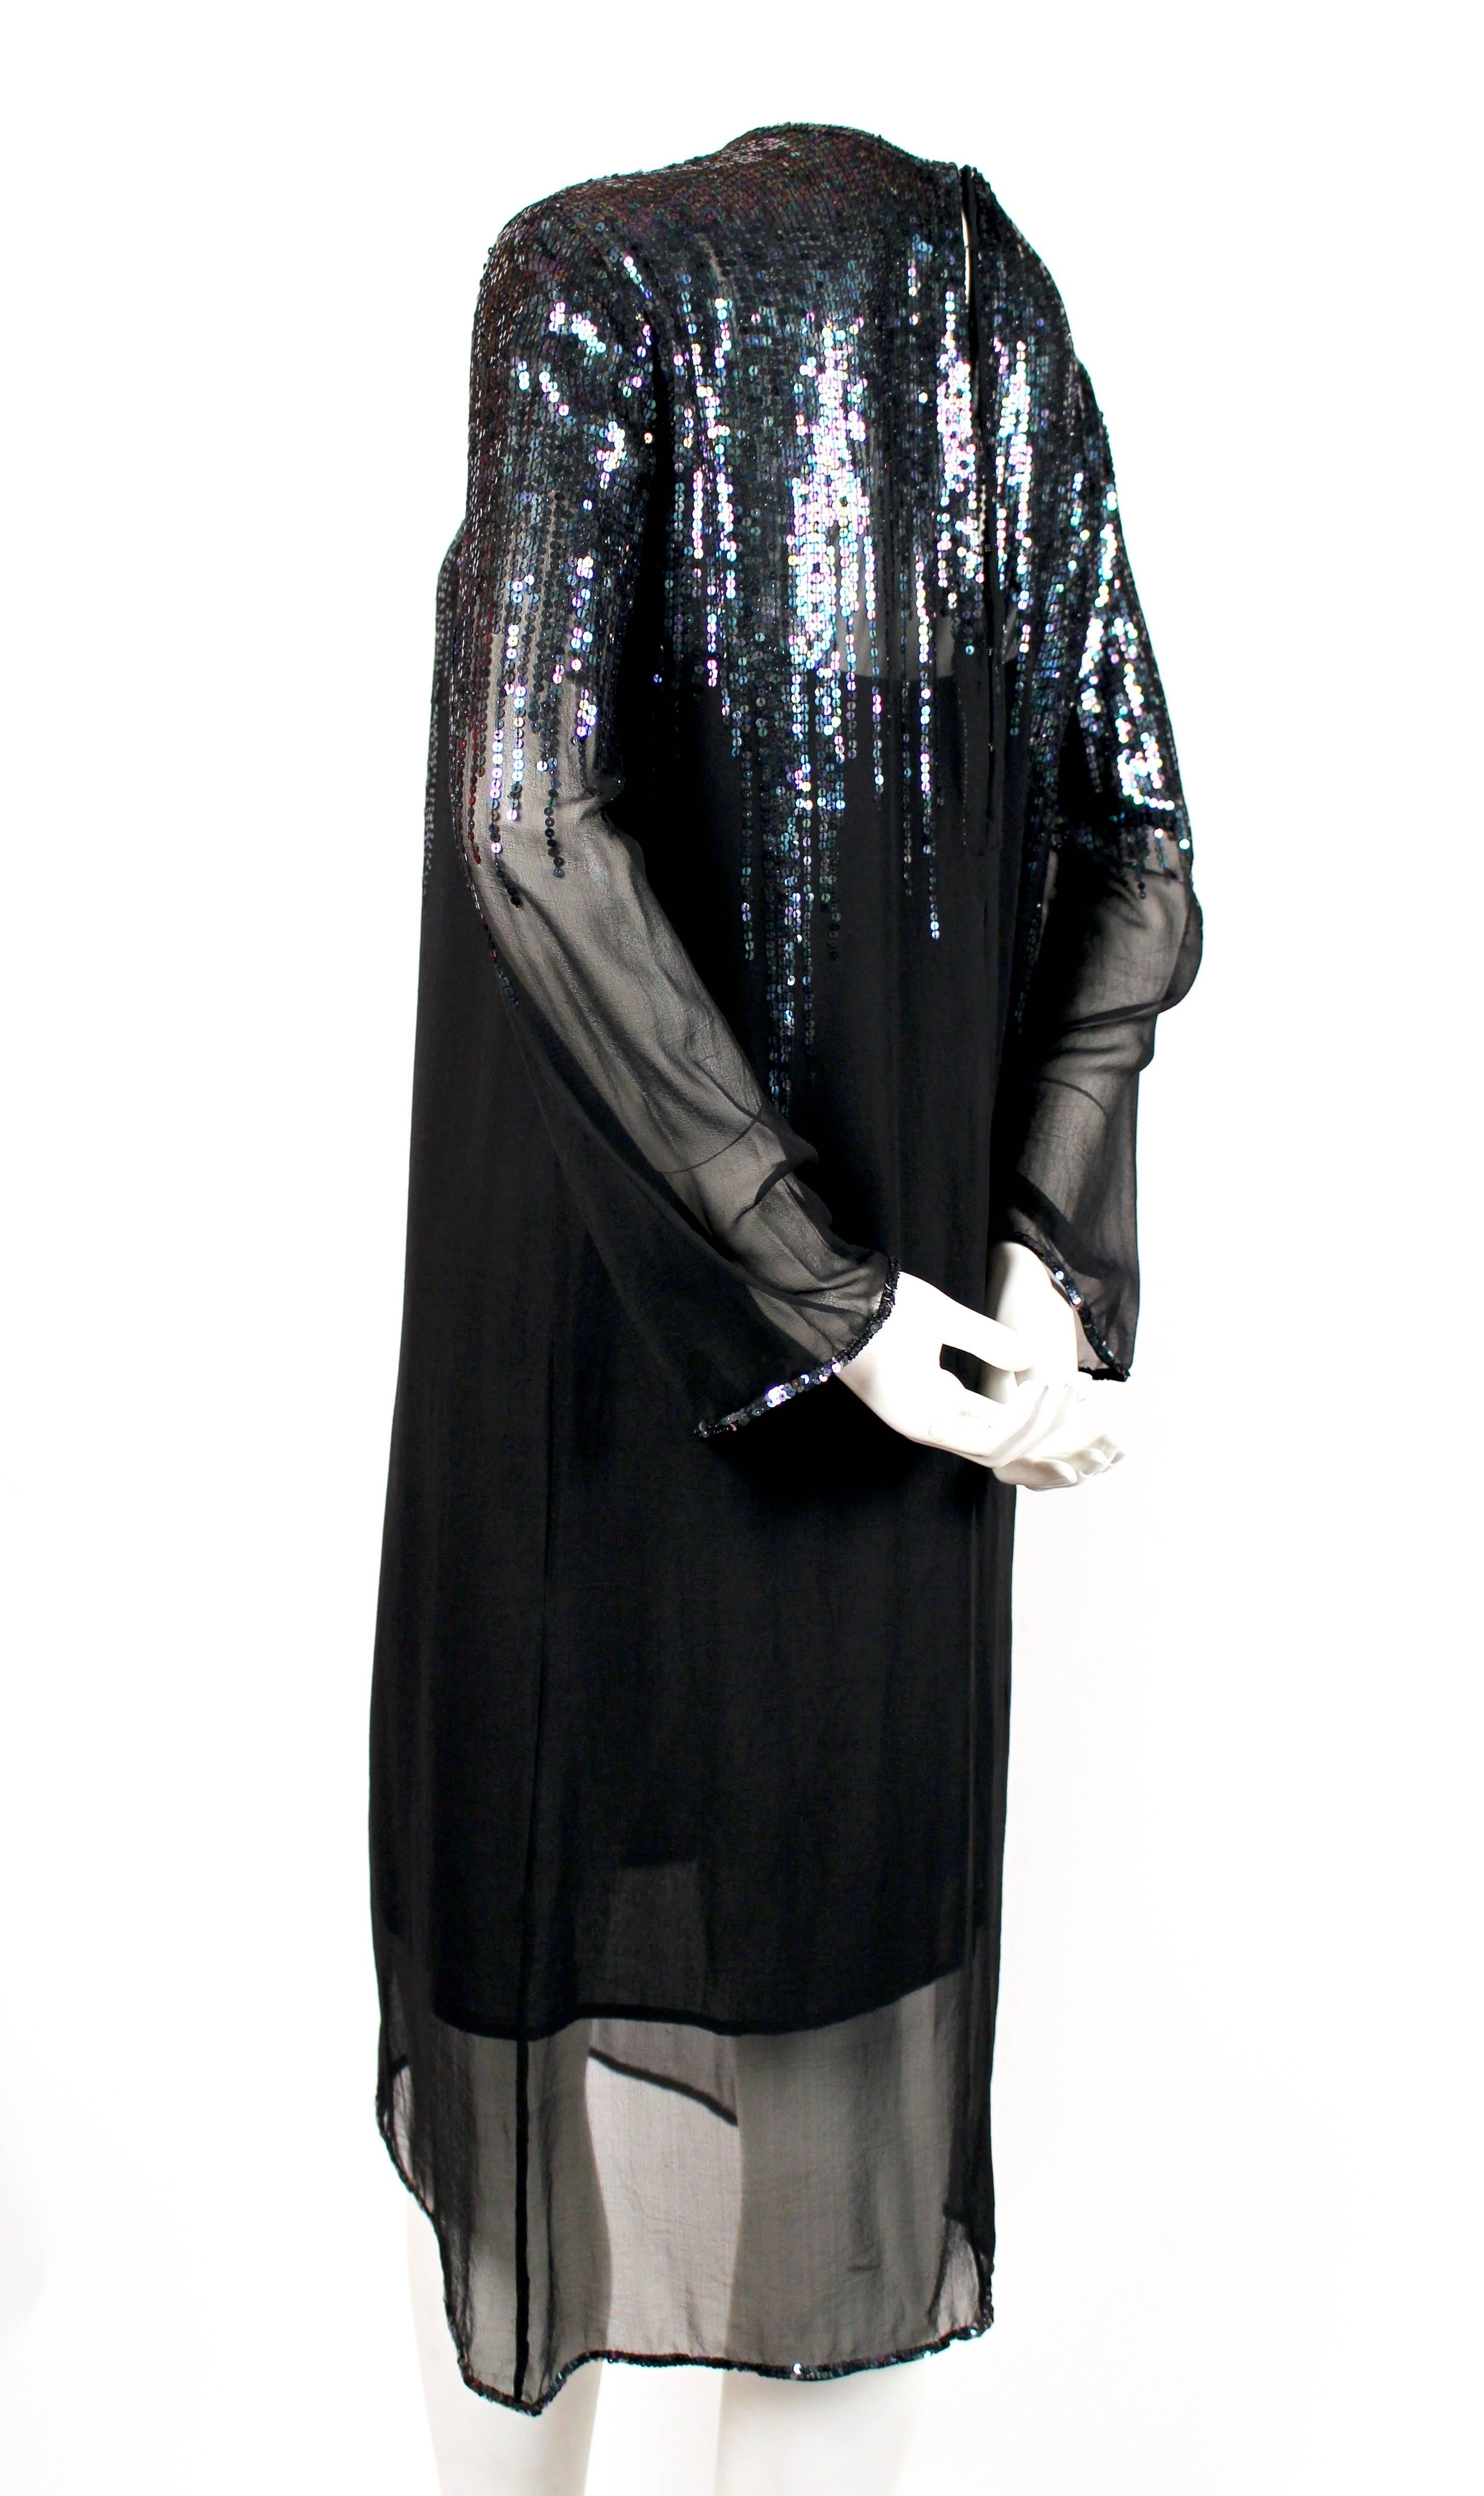 Black 1970's HALSTON black sheer silk dress with sequined detail